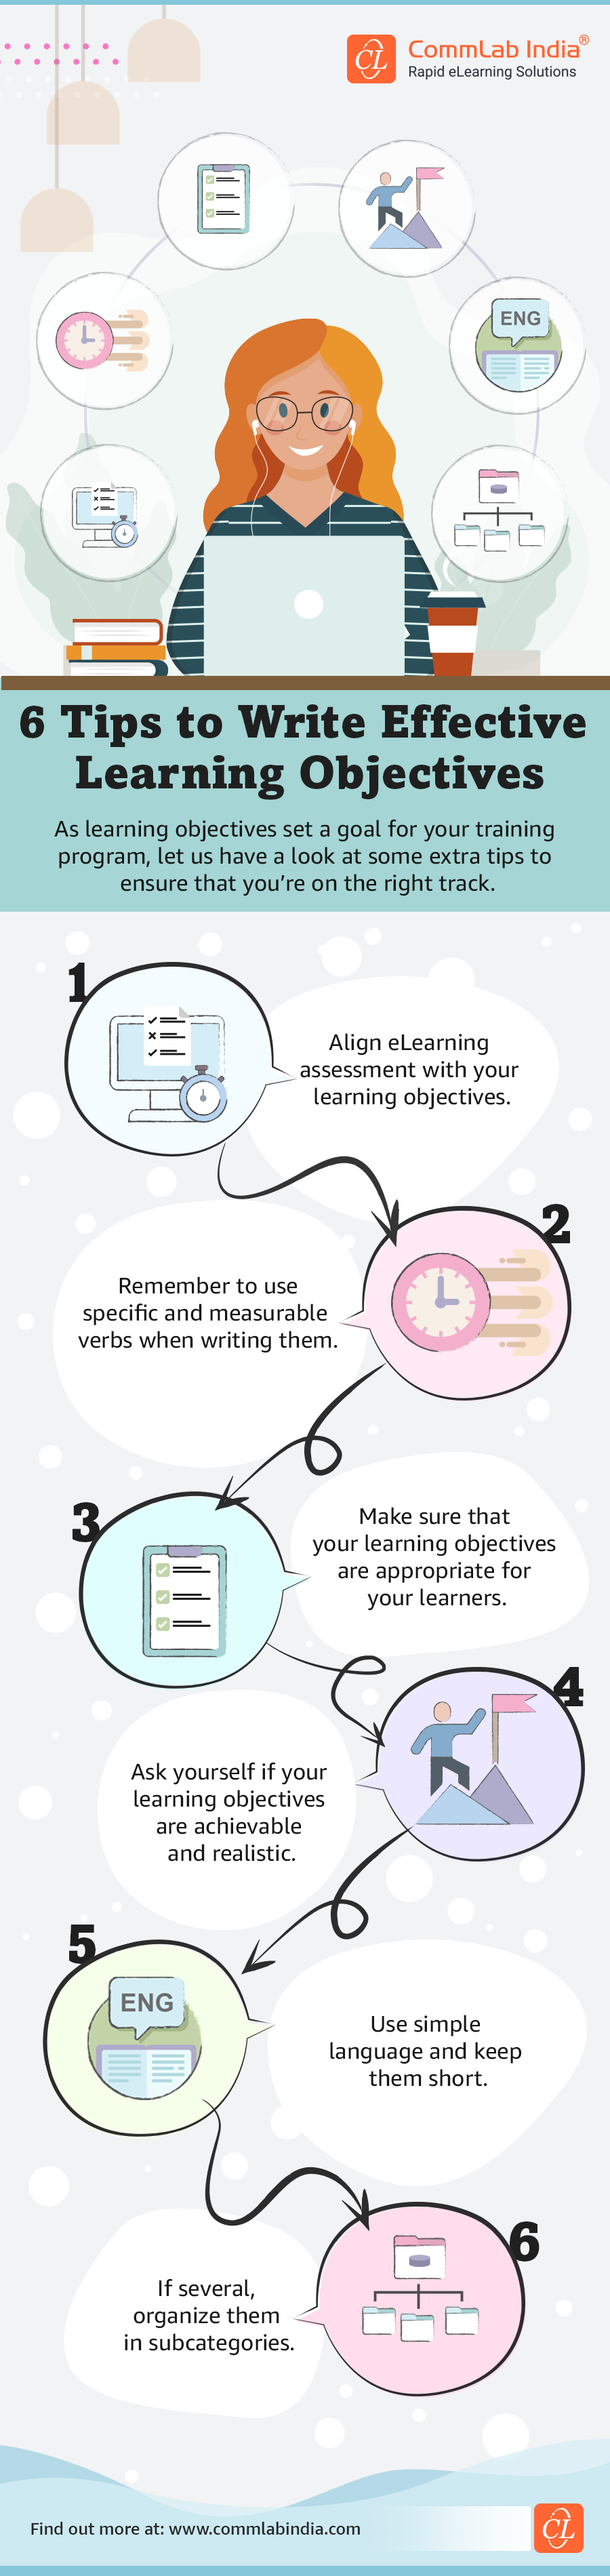 Tips to Create Effective Learning Objectives7